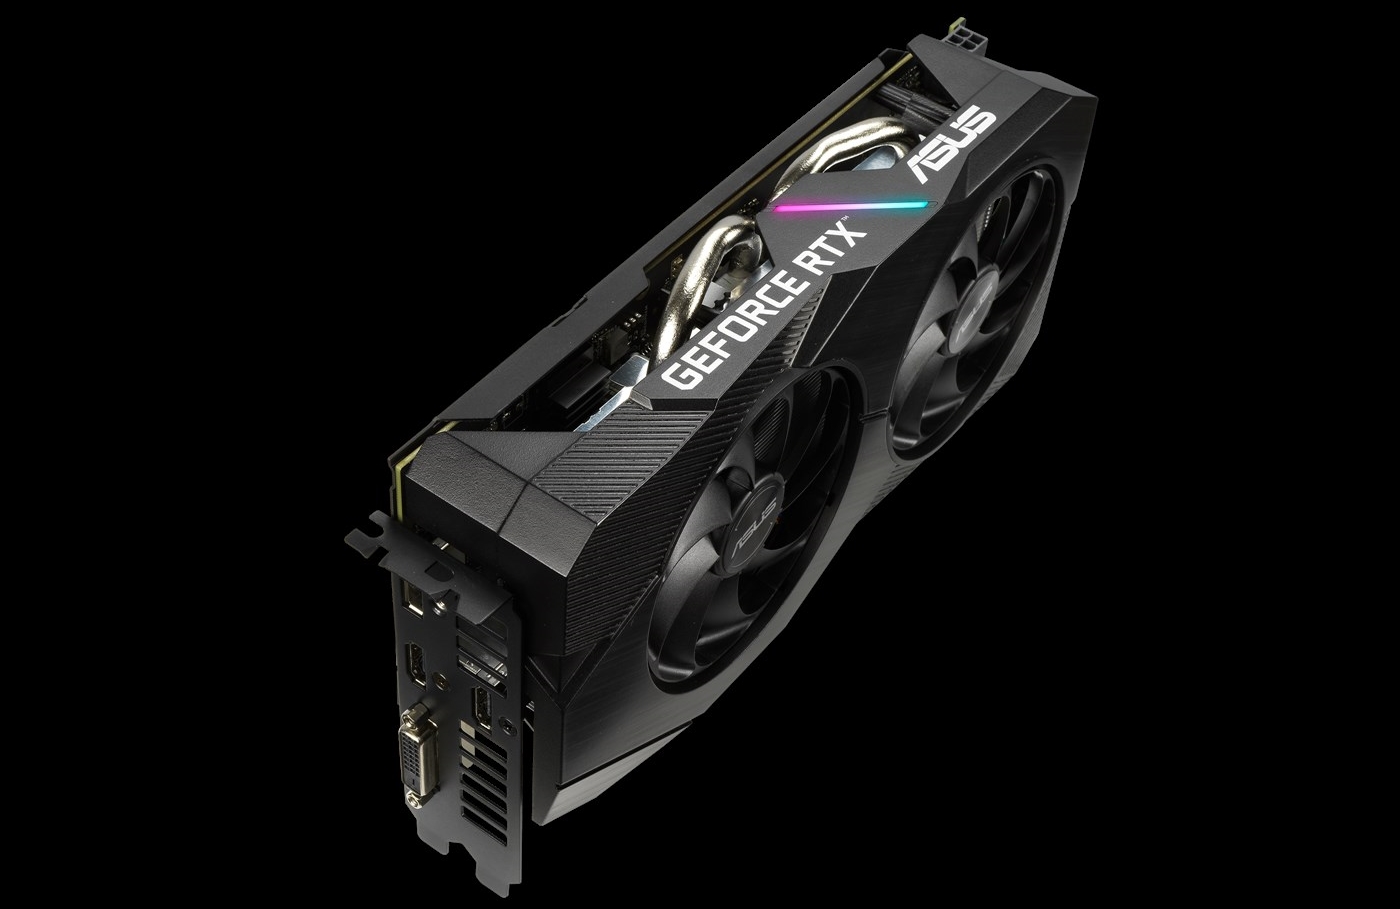 Geforce rtx low profile. ASUS RTX 2060. RTX 2060 ASUS Dual. ASUS Dual GEFORCE RTX 2060 EVO [Dual-rtx2060-6g-EVO]. ASUS RTX 2060 6gb.